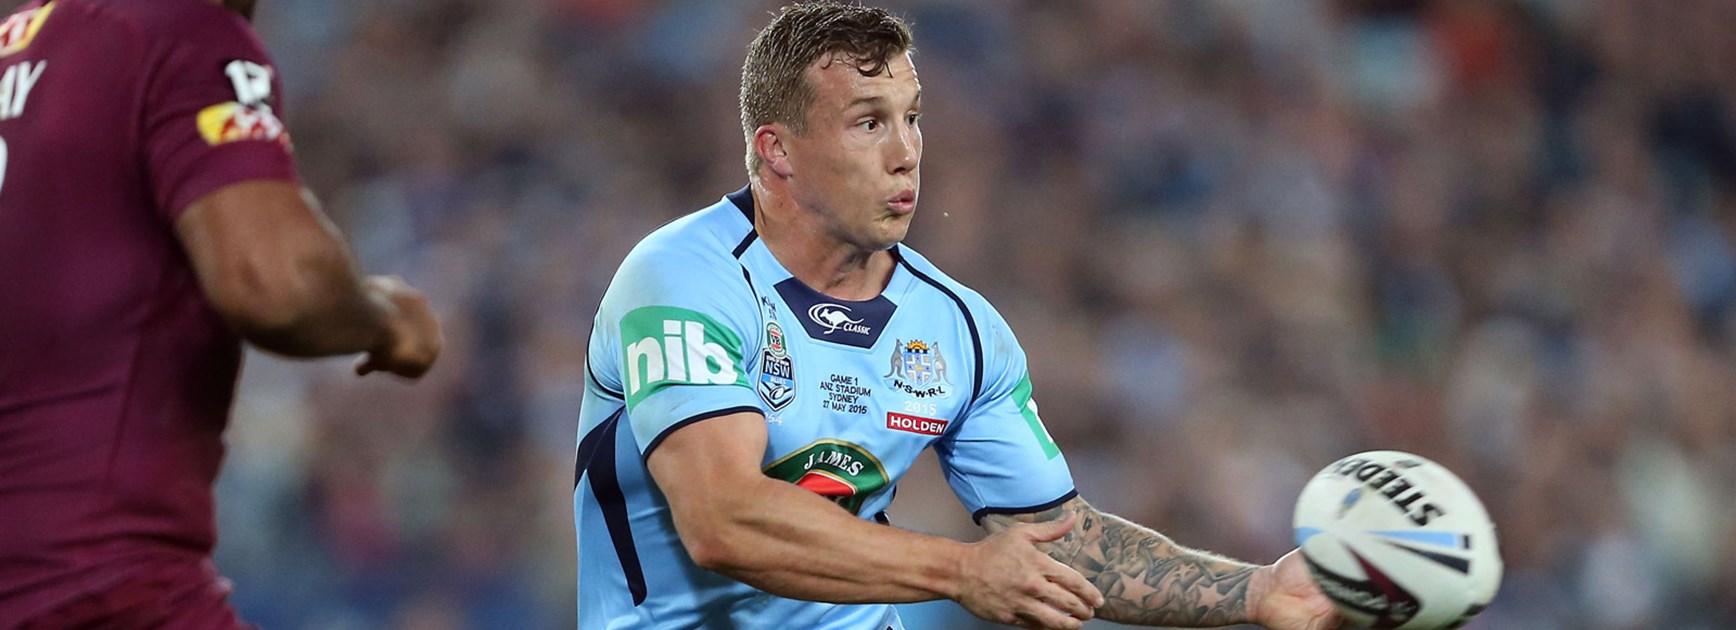 Blues halfback Trent Hodkinson in action during the opening game of the 2015 Holden State of Origin series.